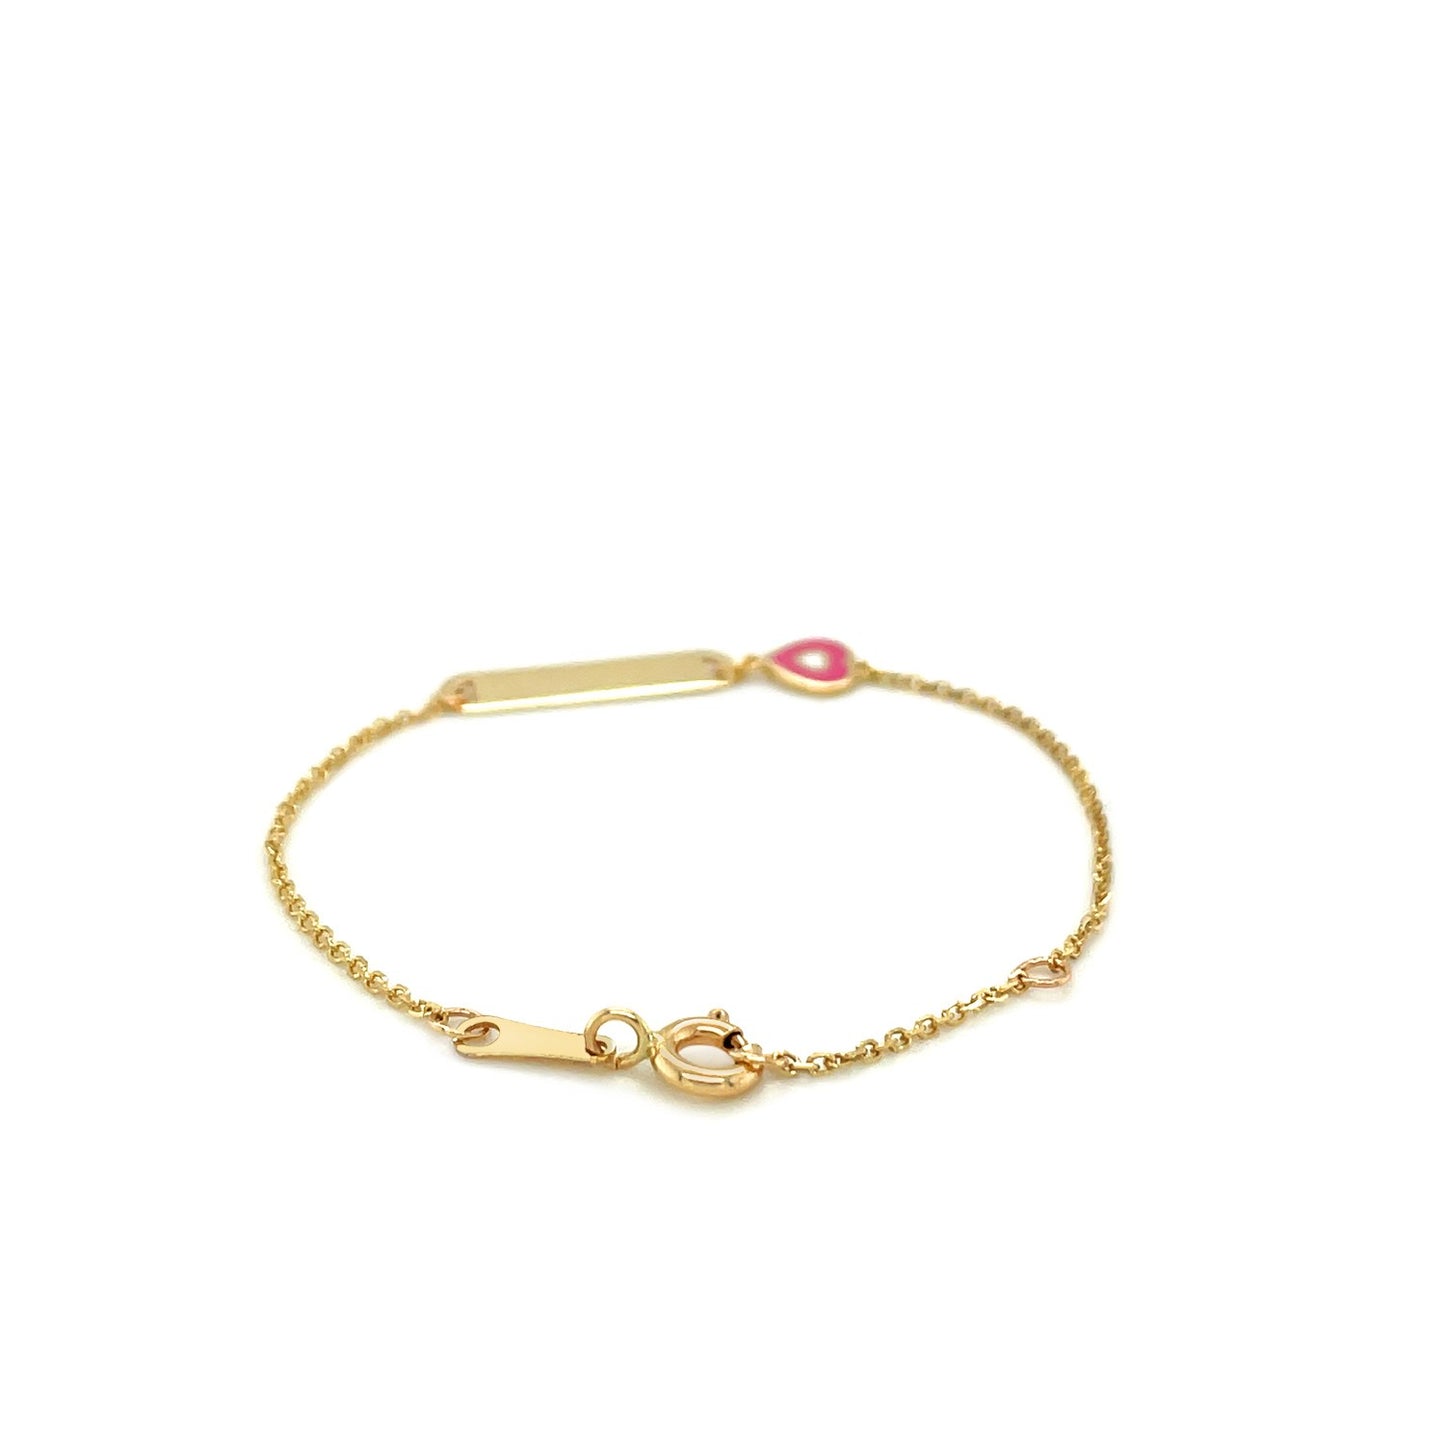 14k Yellow Gold 5 1/2 inch Childrens ID Bracelet with Enameled Heart